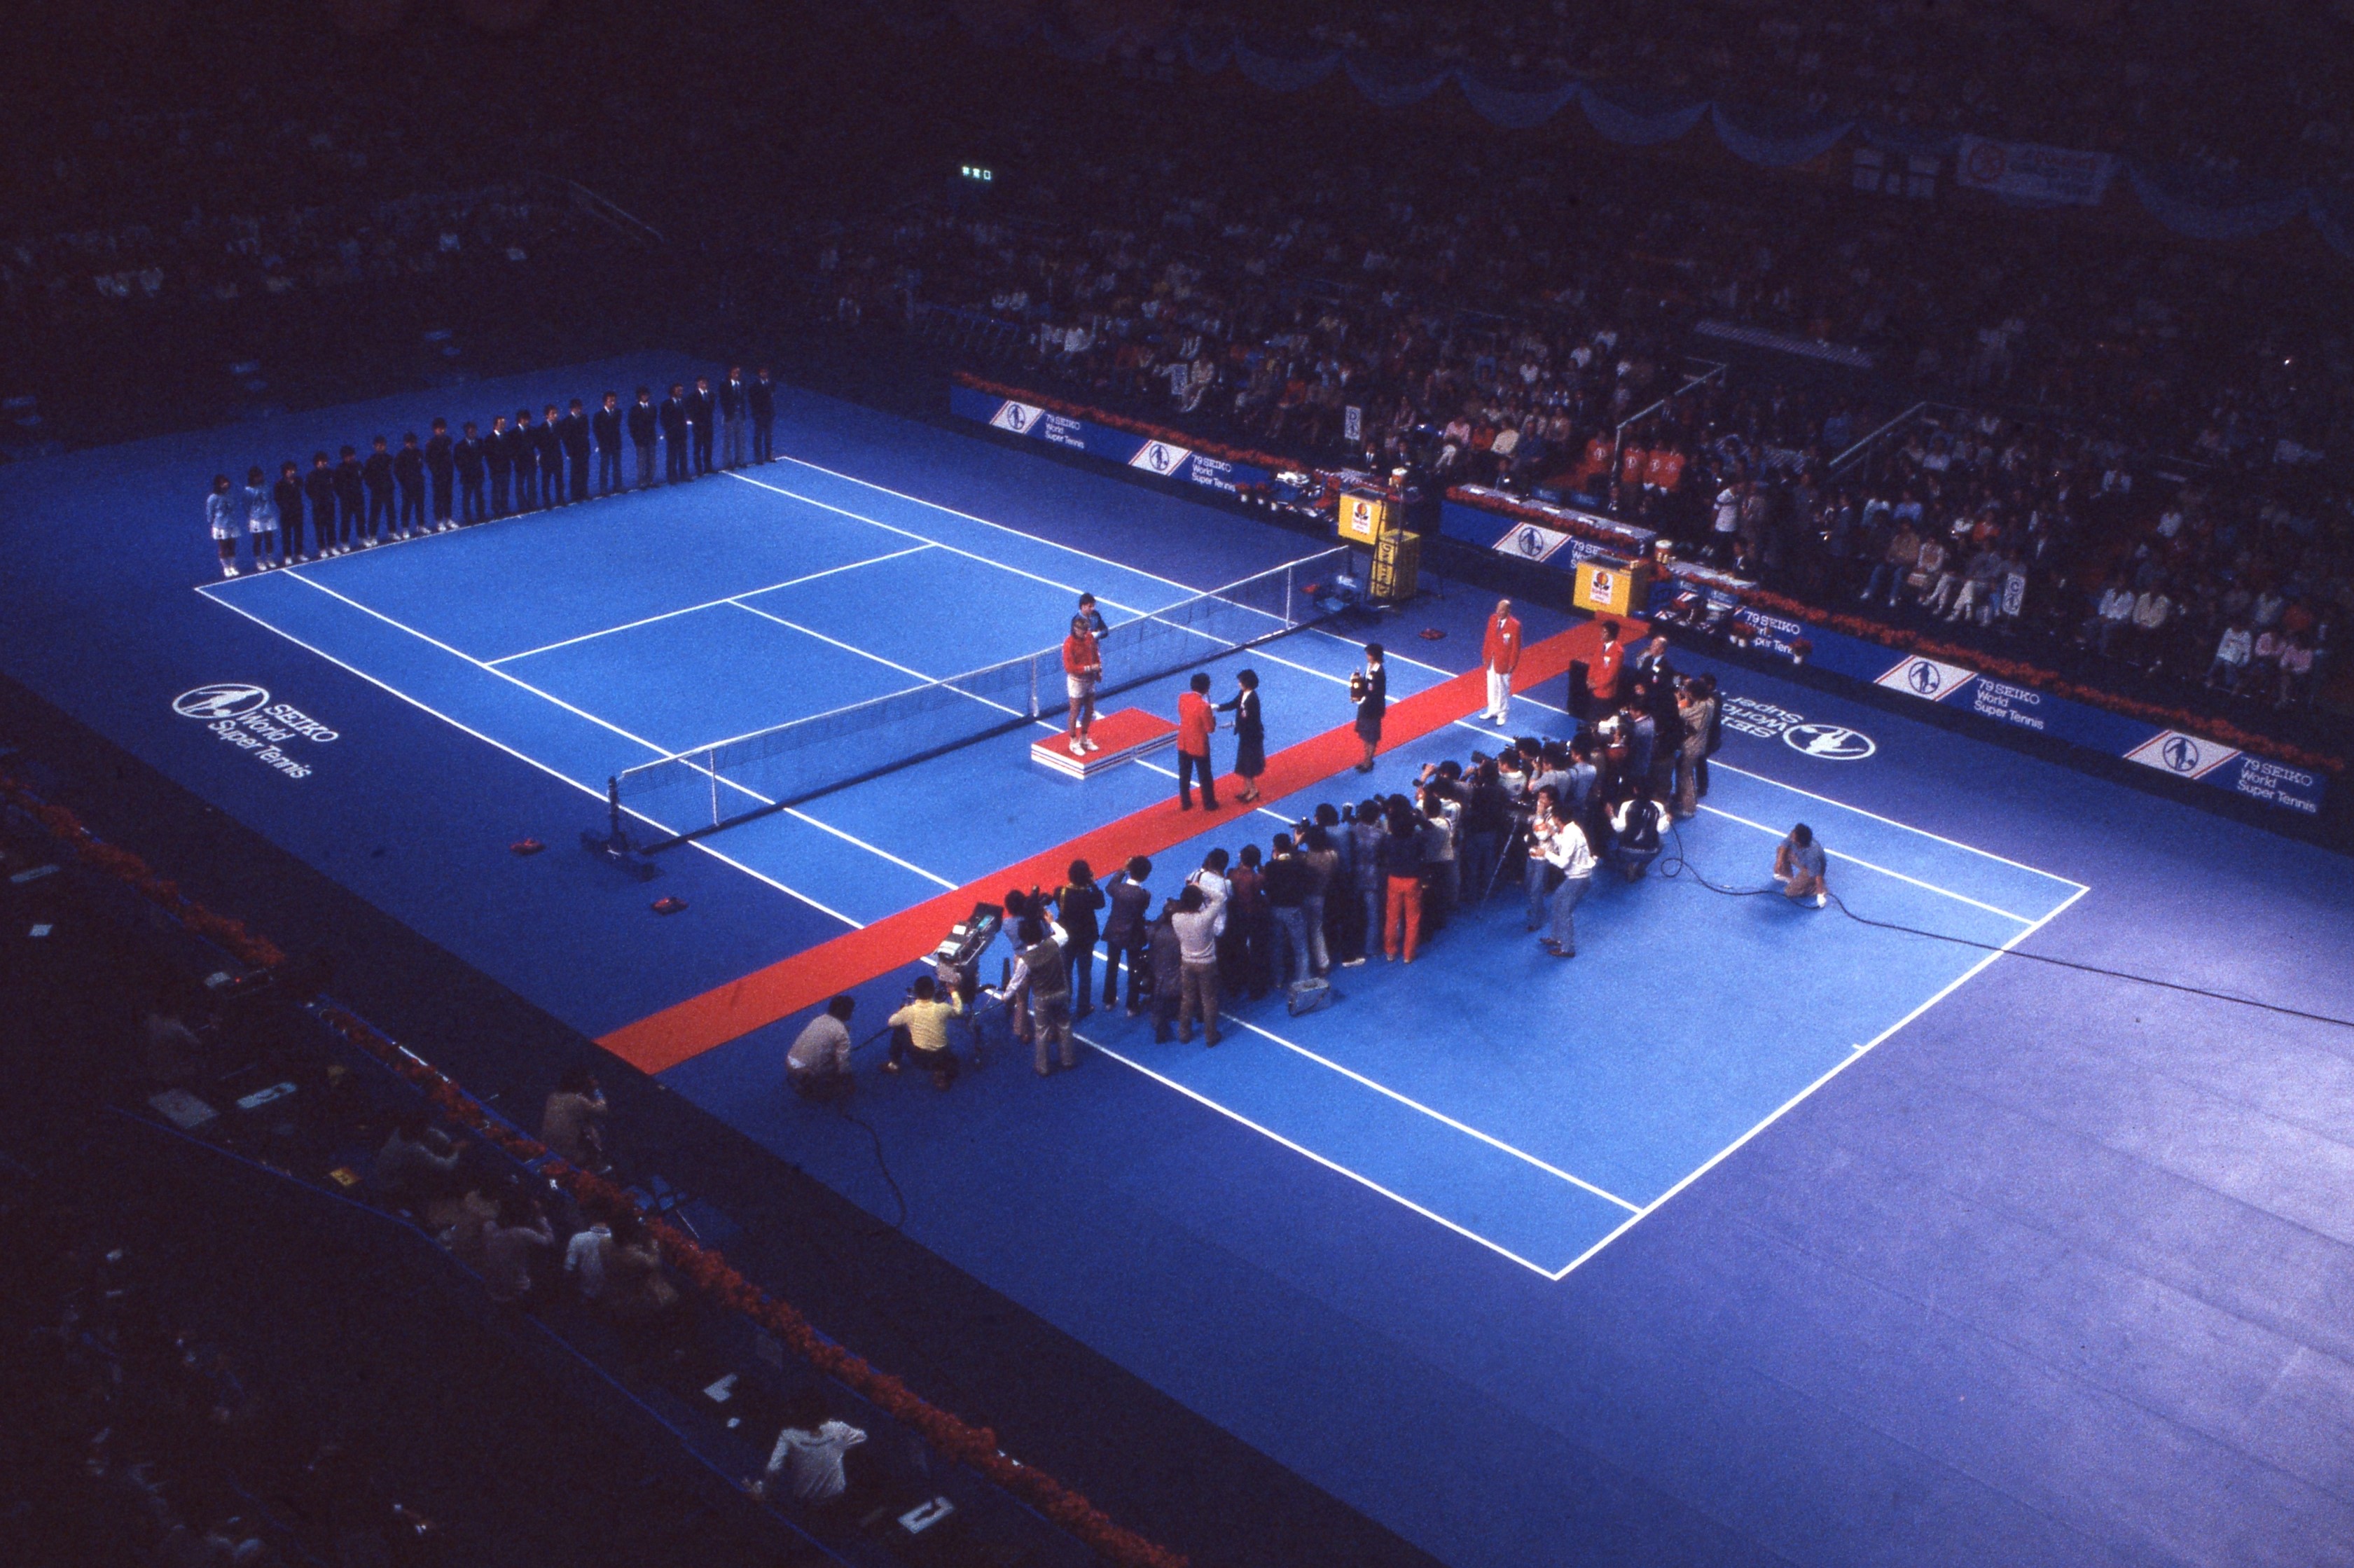 Special exhibition : The History of Seiko Super Tennis